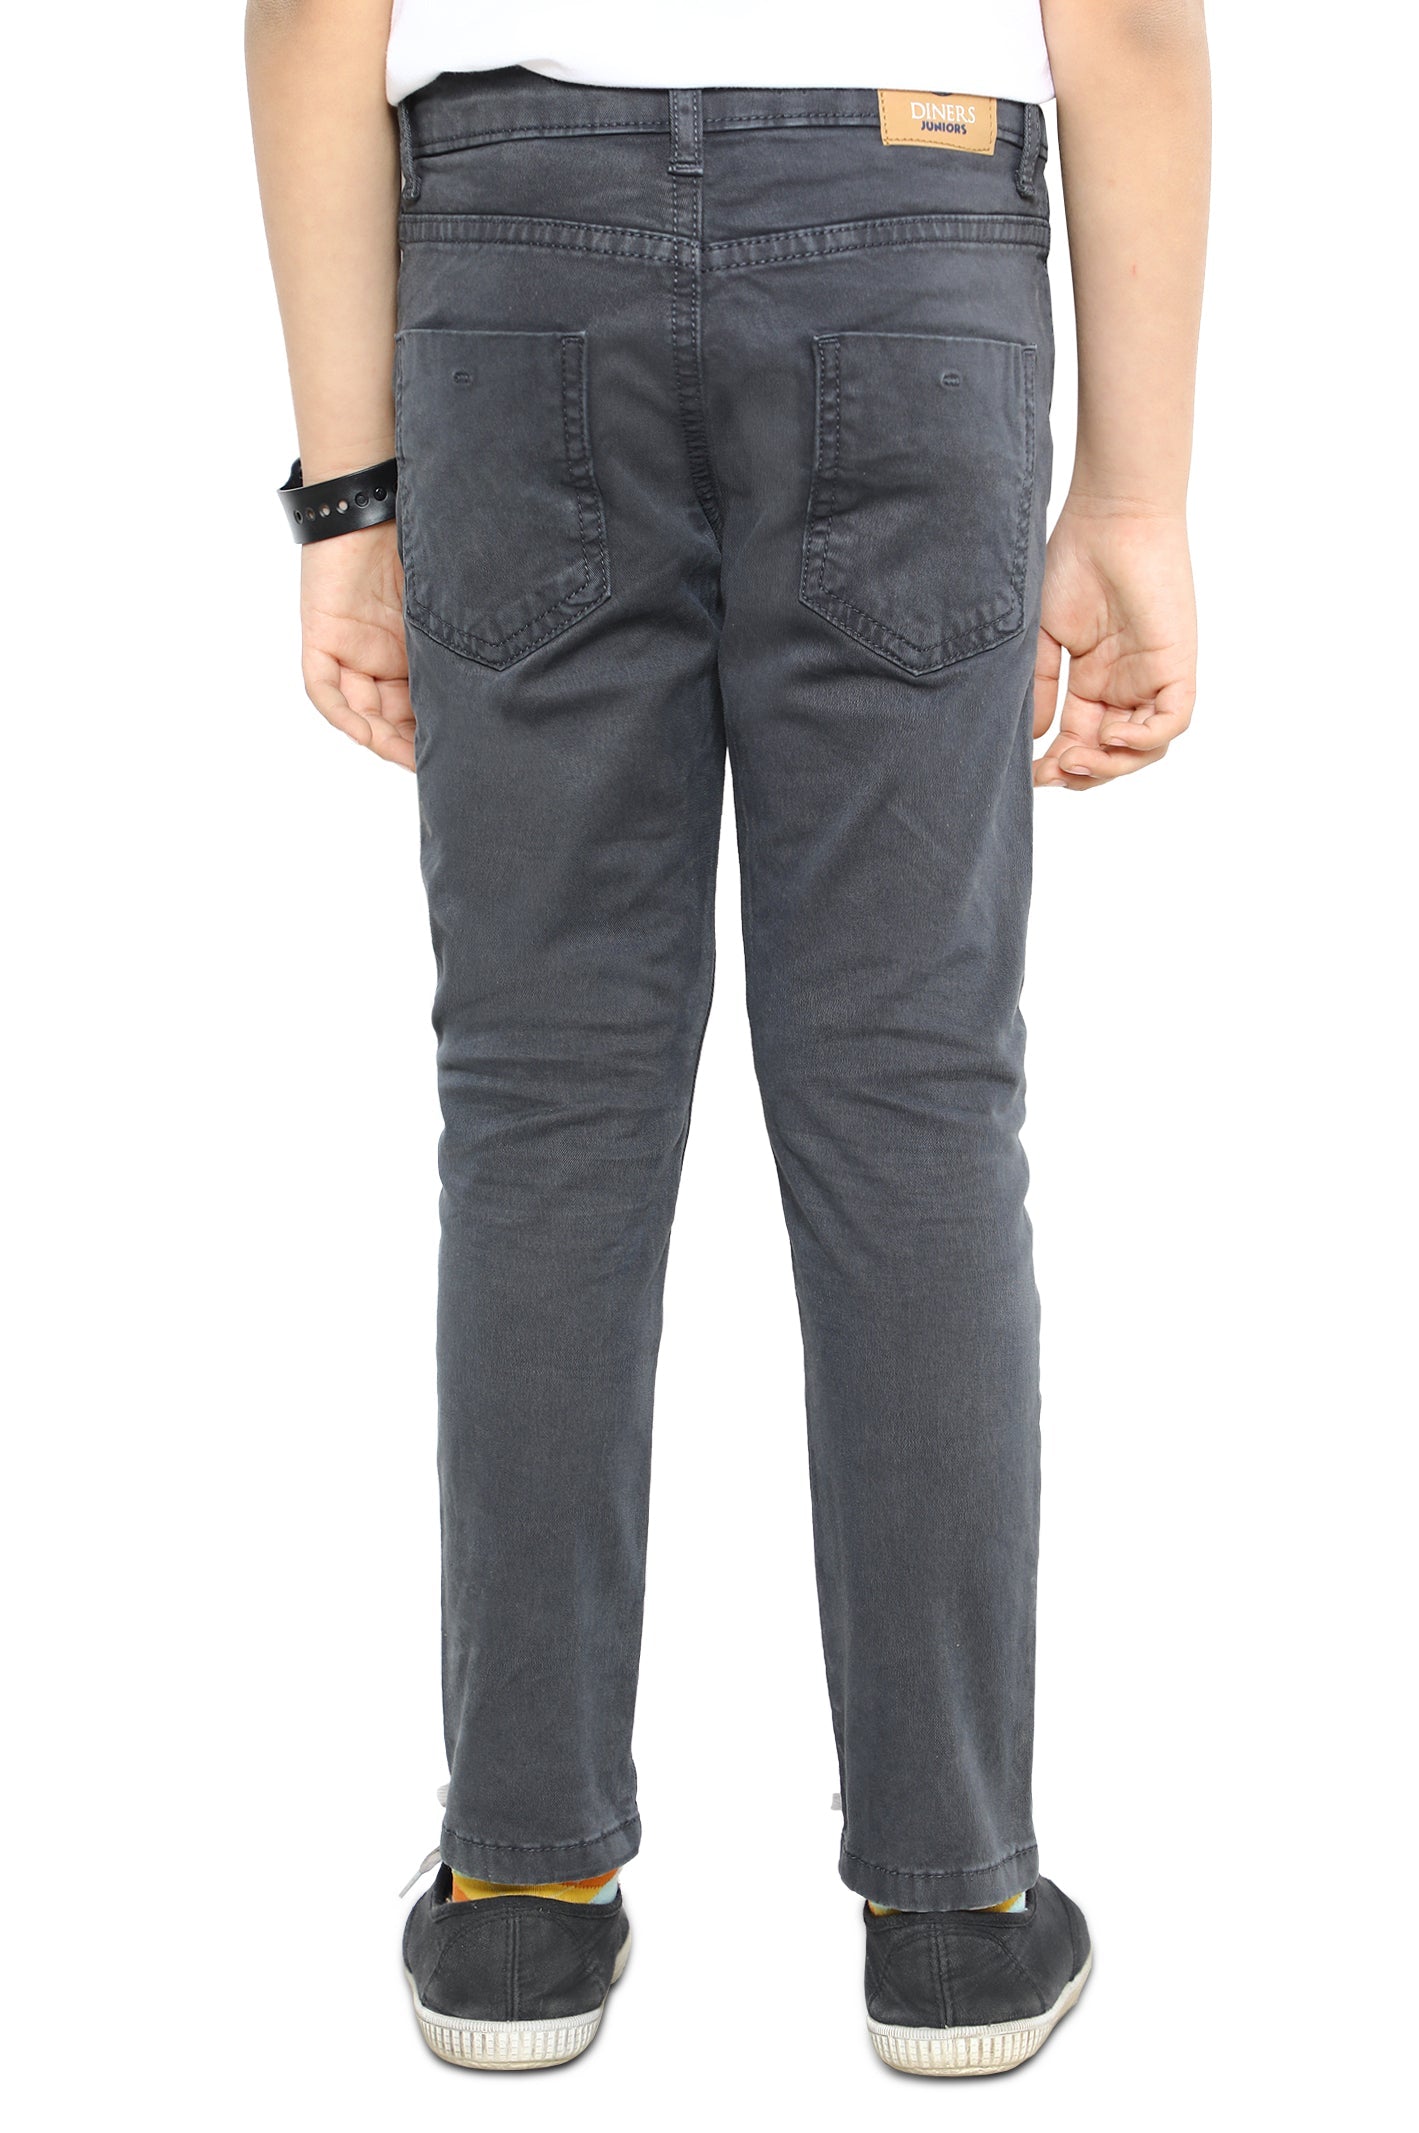 Trouser For Kids SKU: KBC-0413-CHARCOAL - Diners